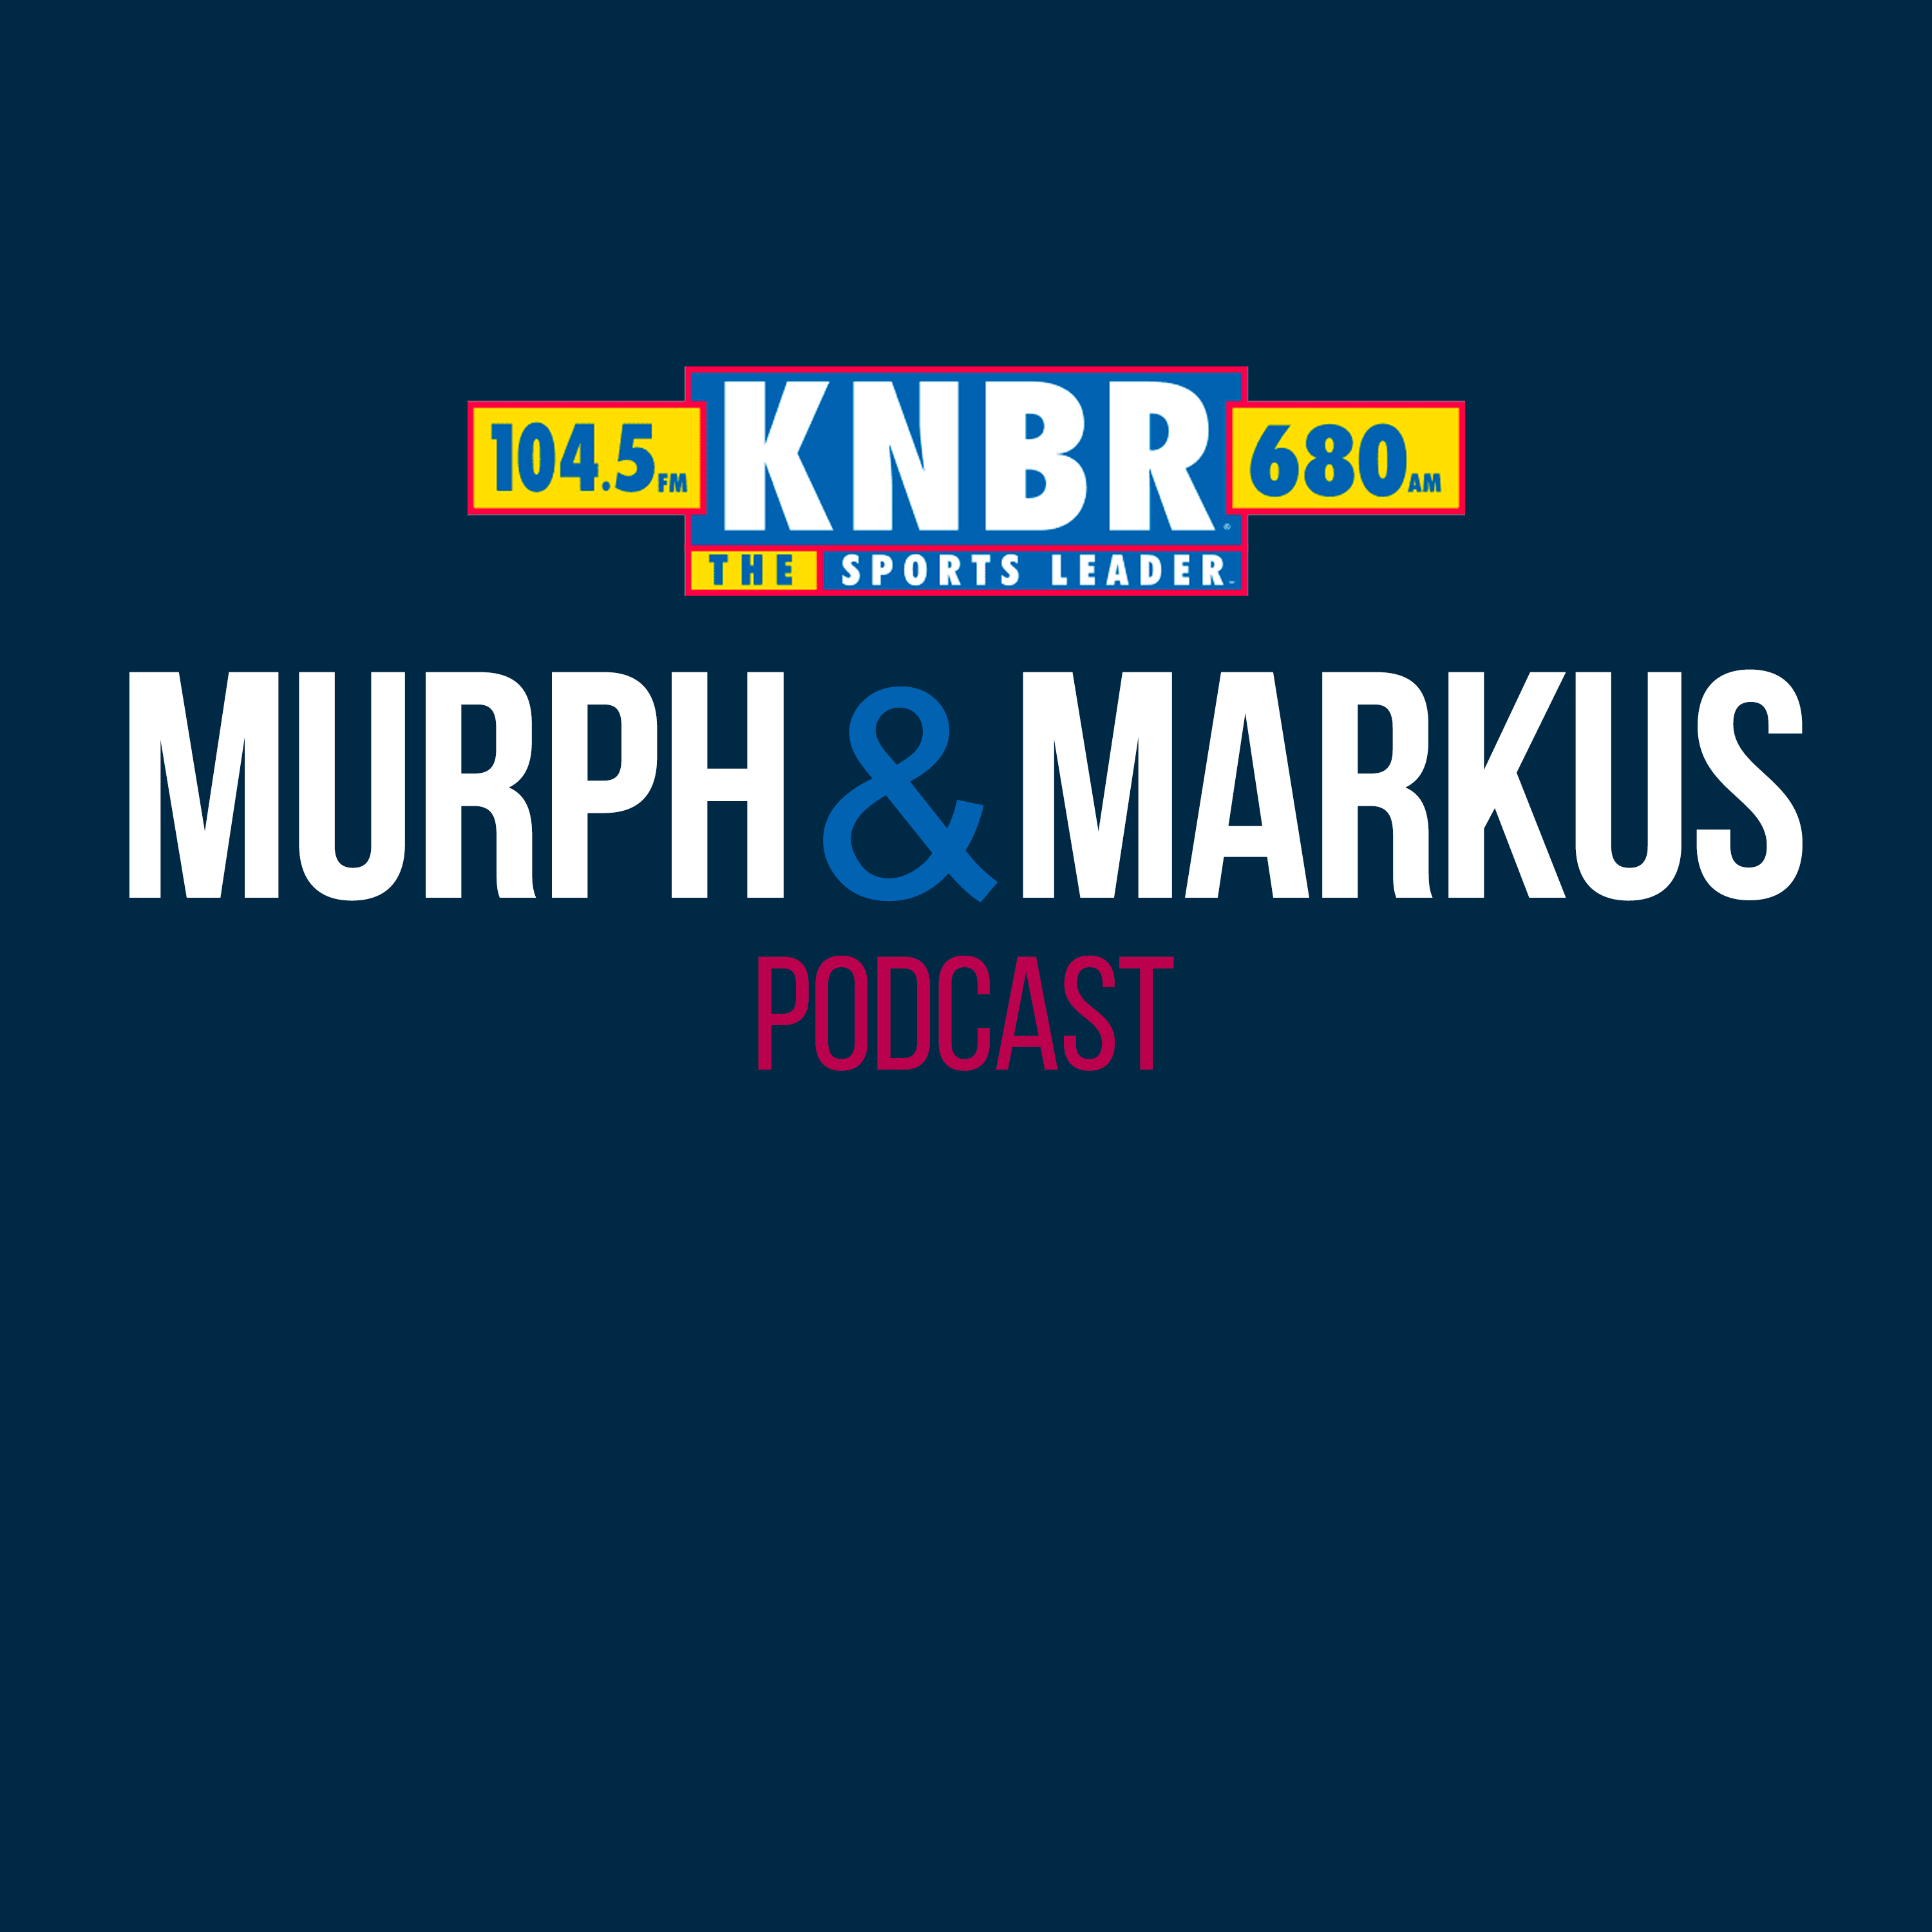 5-10 Hour 3: Murph & Markus dive into the Cooler of Content, talk to Alex Smith, and react to some of his comments about why the 49ers haven't won a Super Bowl in the Kyle Shanahan/John Lynch era